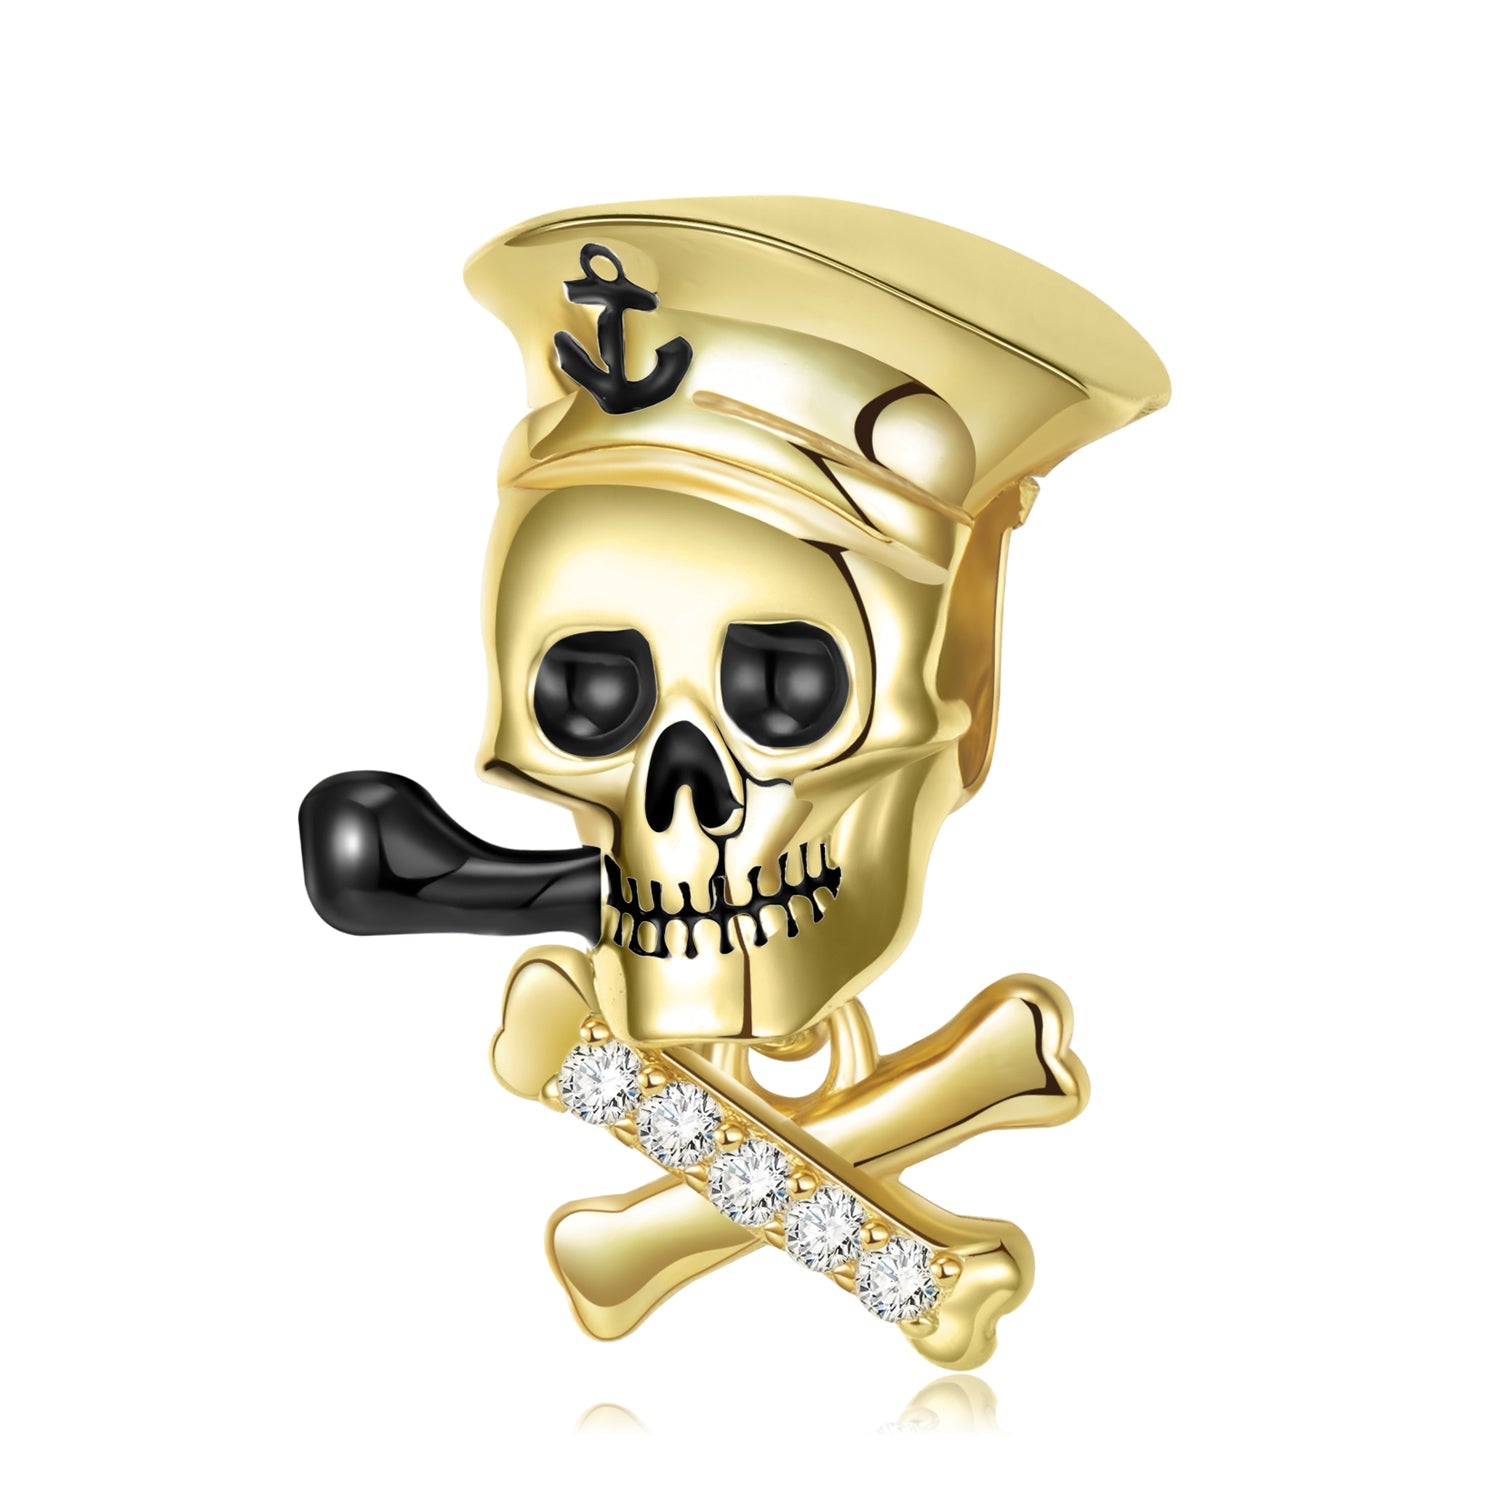 Golden skull with pipe and captain's hat